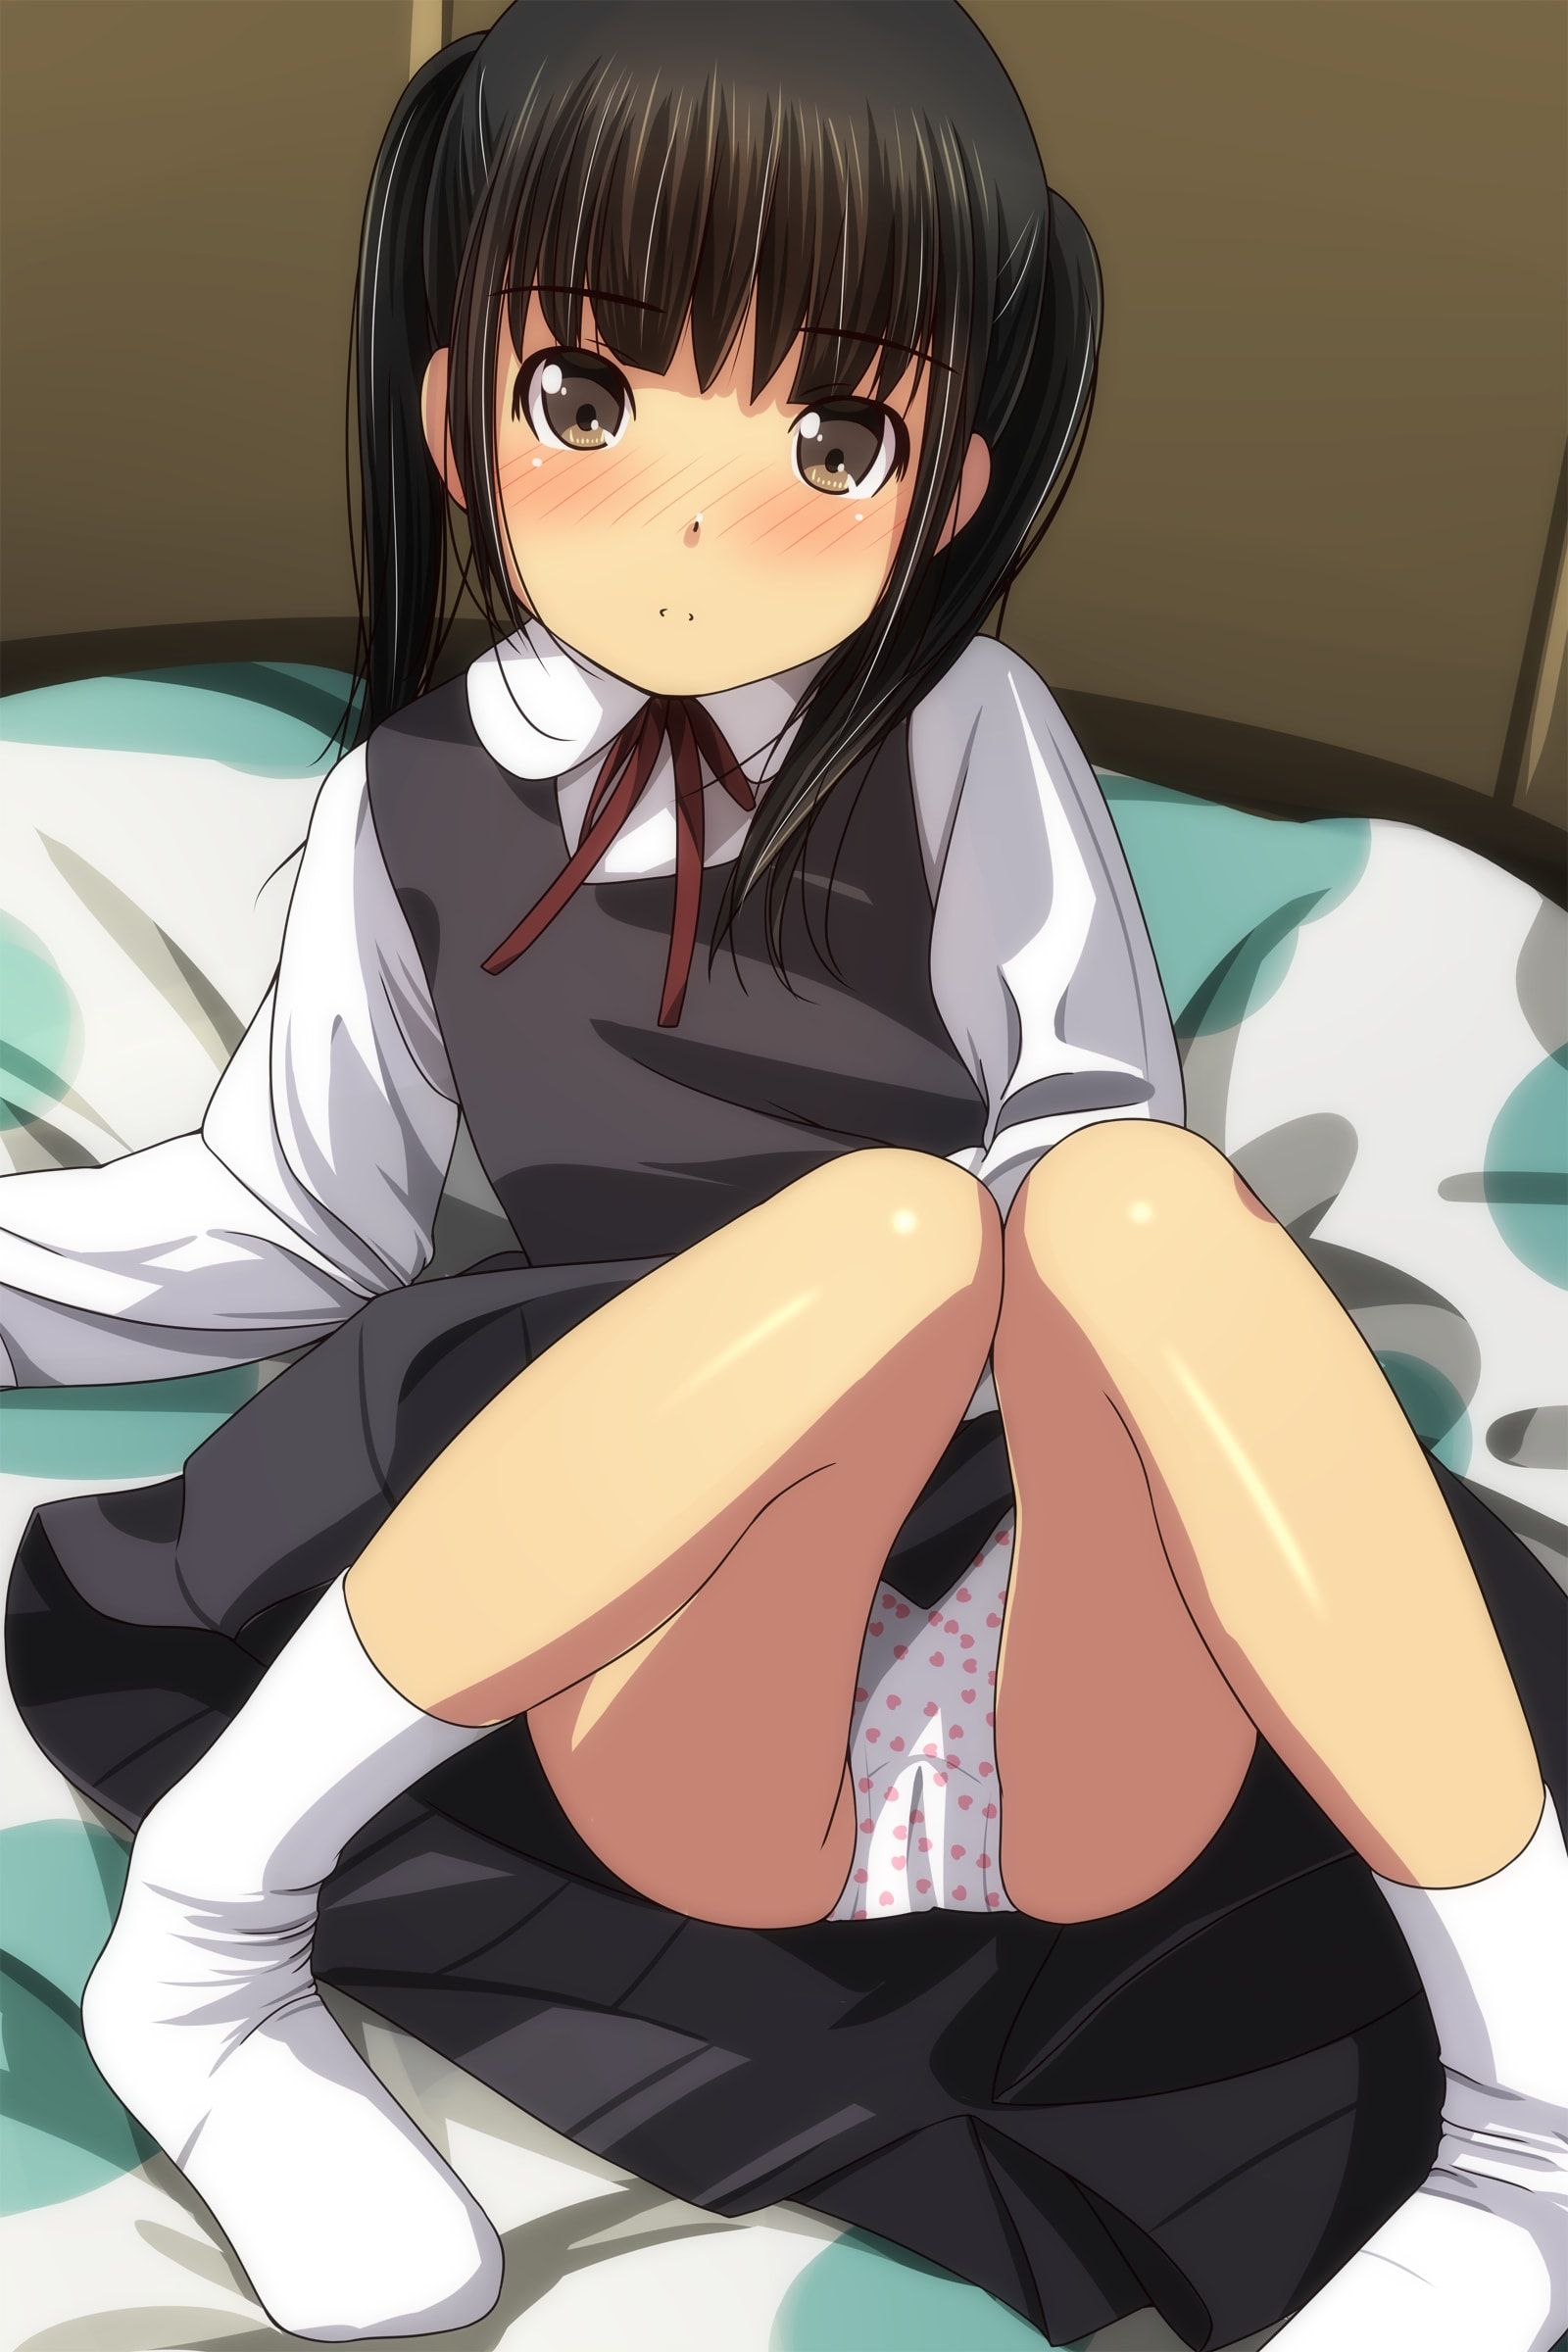 【Excited about Lori pants】 Lori pants secondary erotic image excited by looking at the cute figure of the treasure of the pants of the secondary loli girl 43